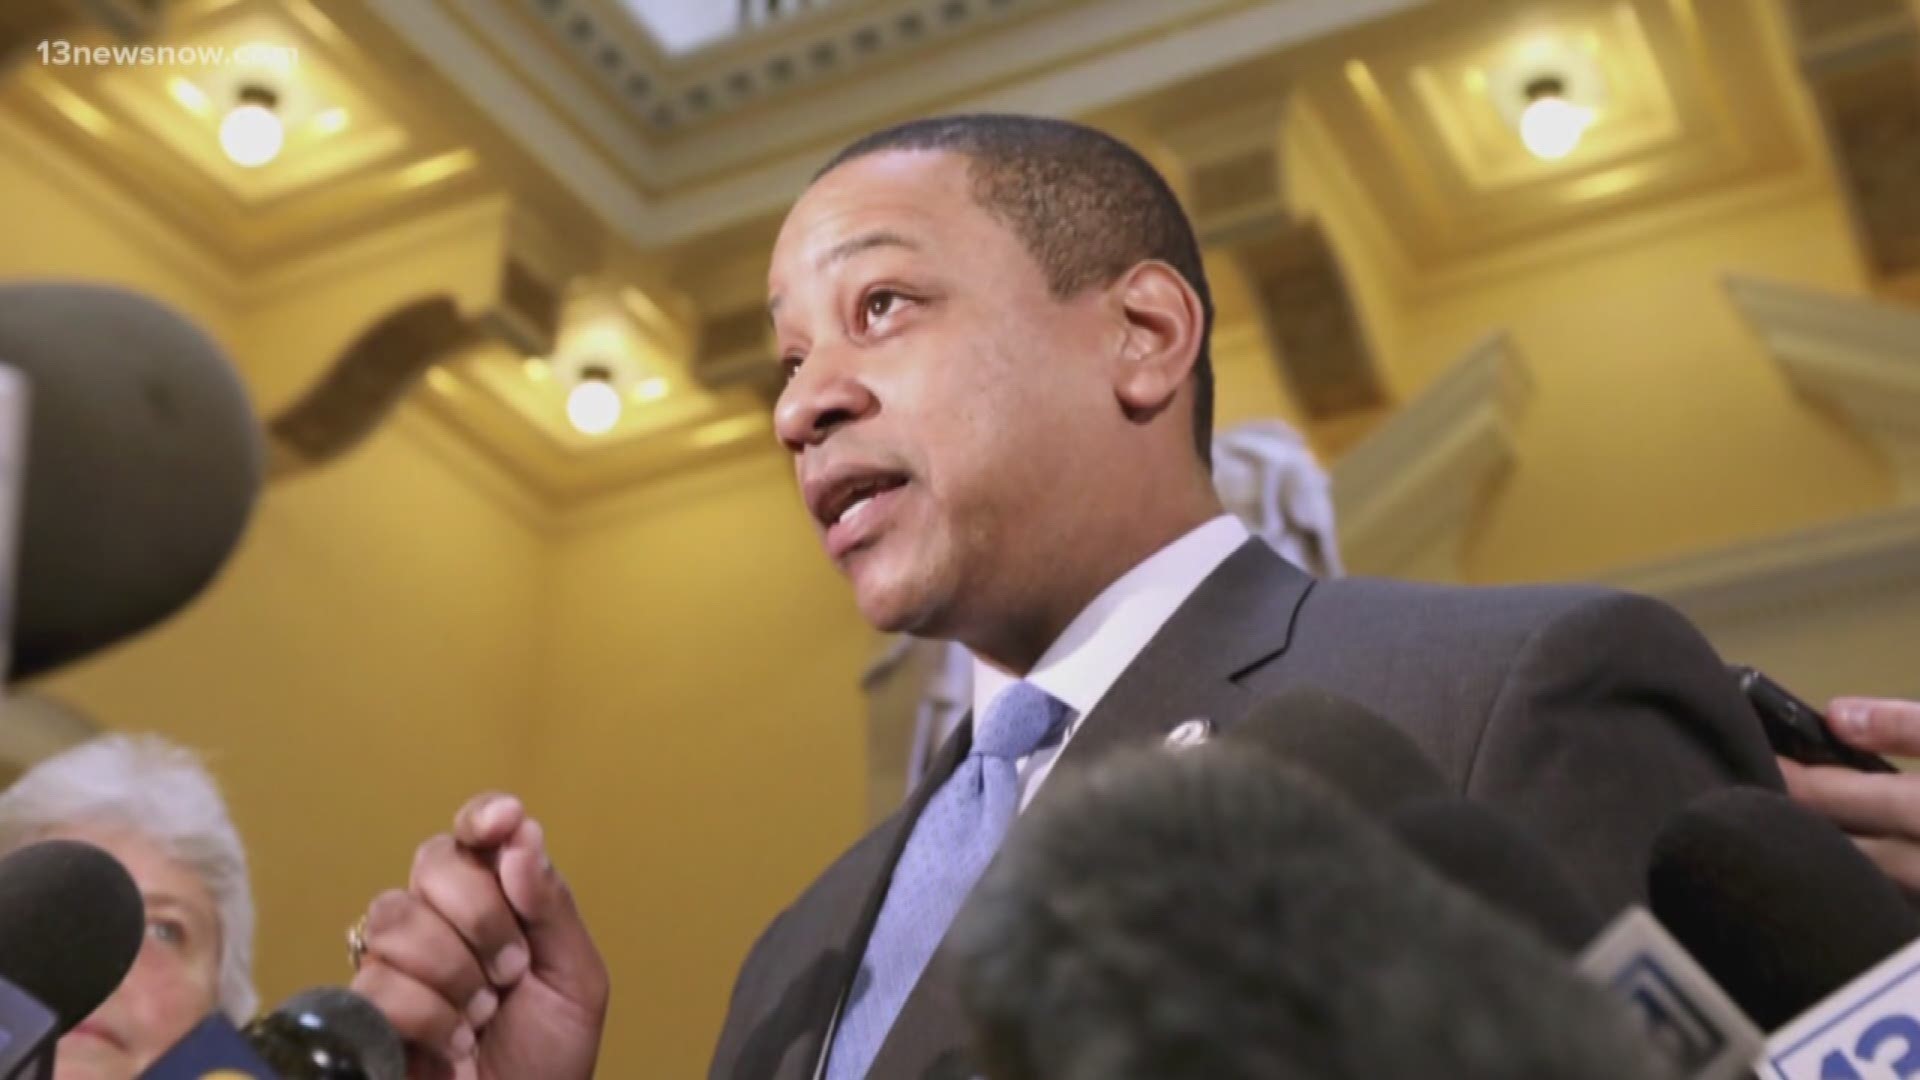 Attorneys for Lt. Governor Justin Fairfax are officially asking prosecutors to open a criminal investigation into the sexual assault allegations against him.